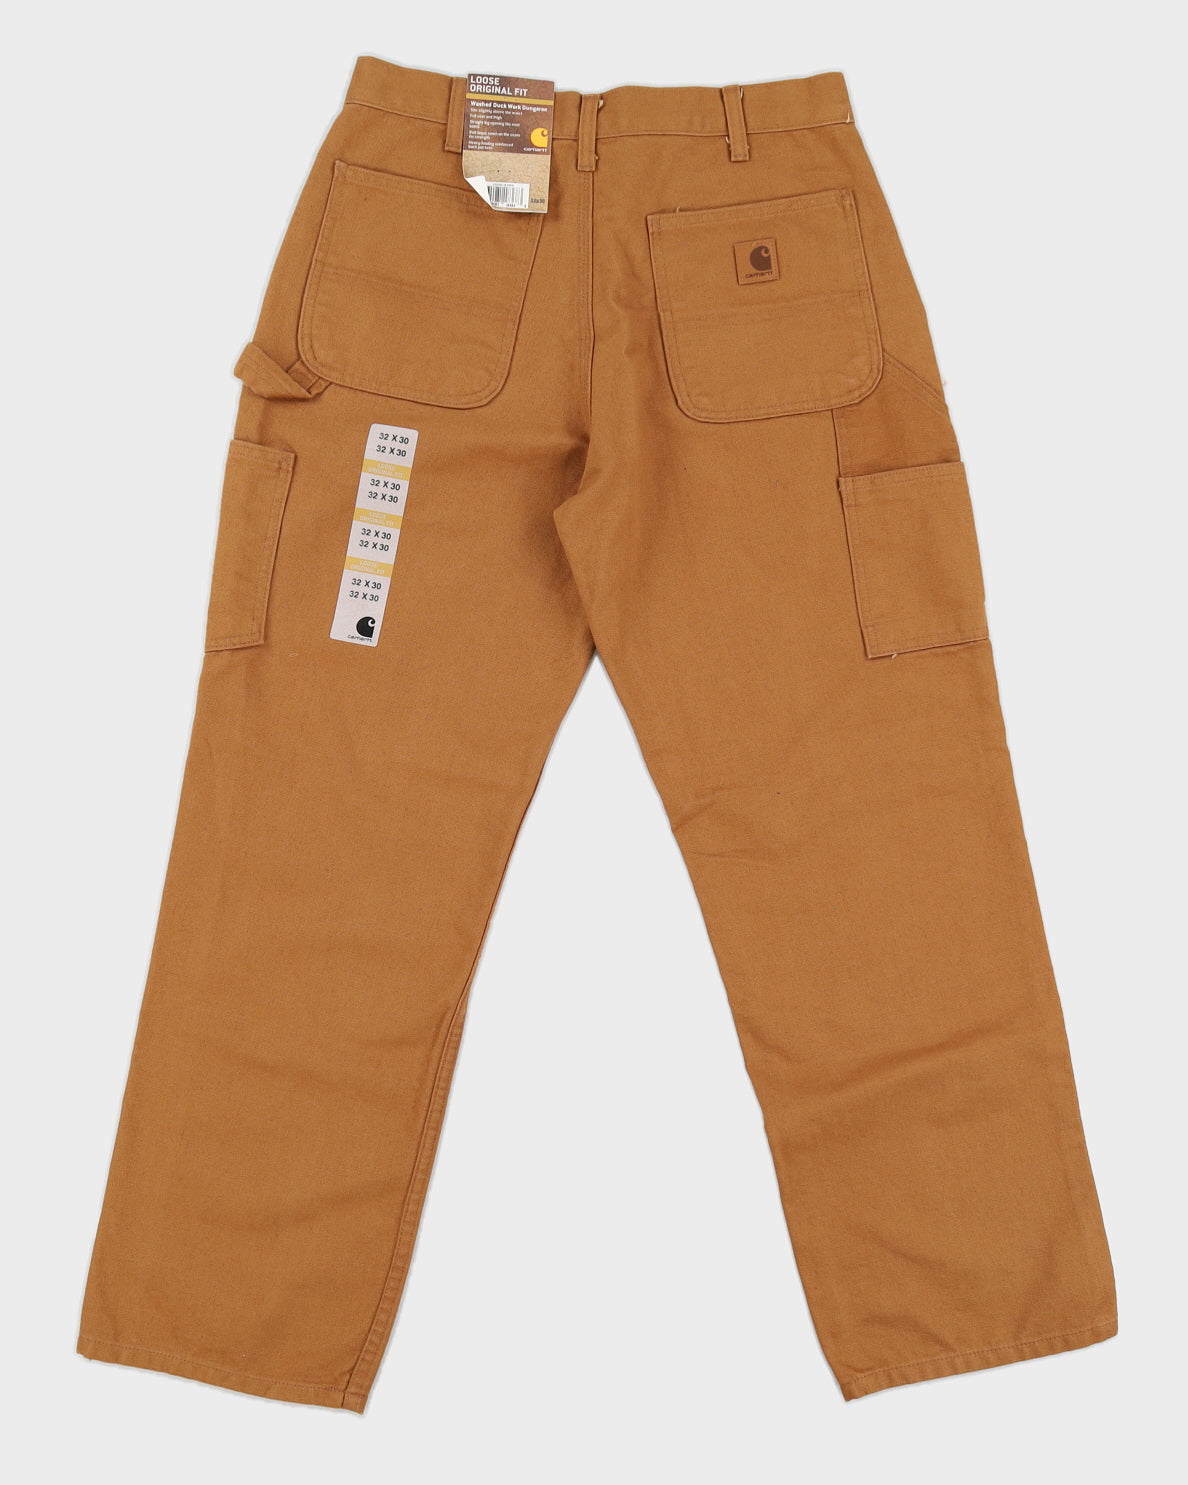 Carhartt Brown Work Trousers Deadstock With Tags  - W32 L30